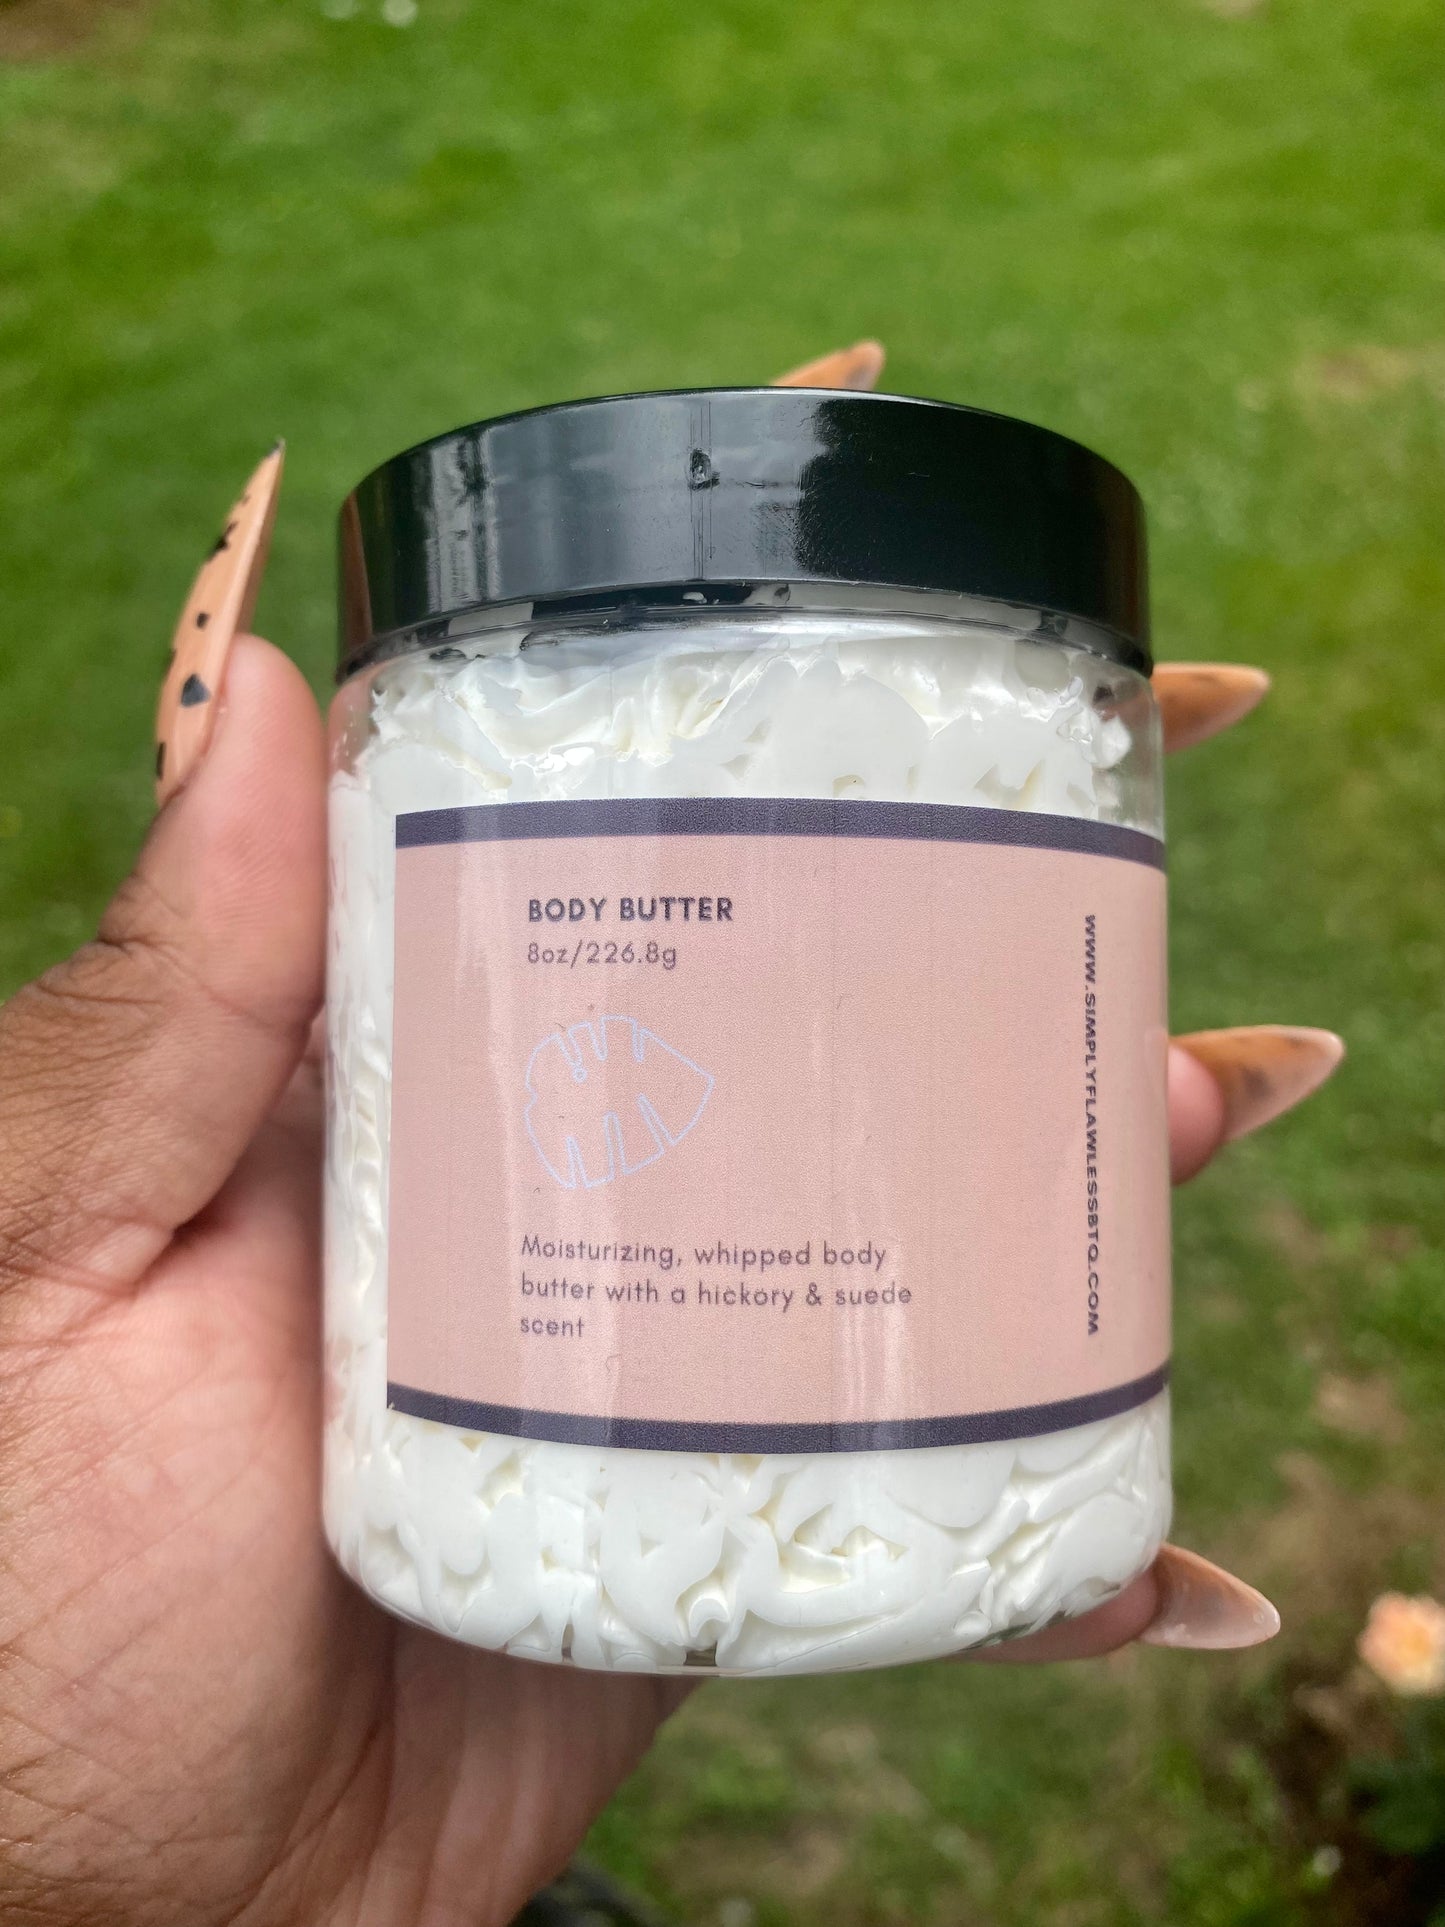 Suede Body Butter